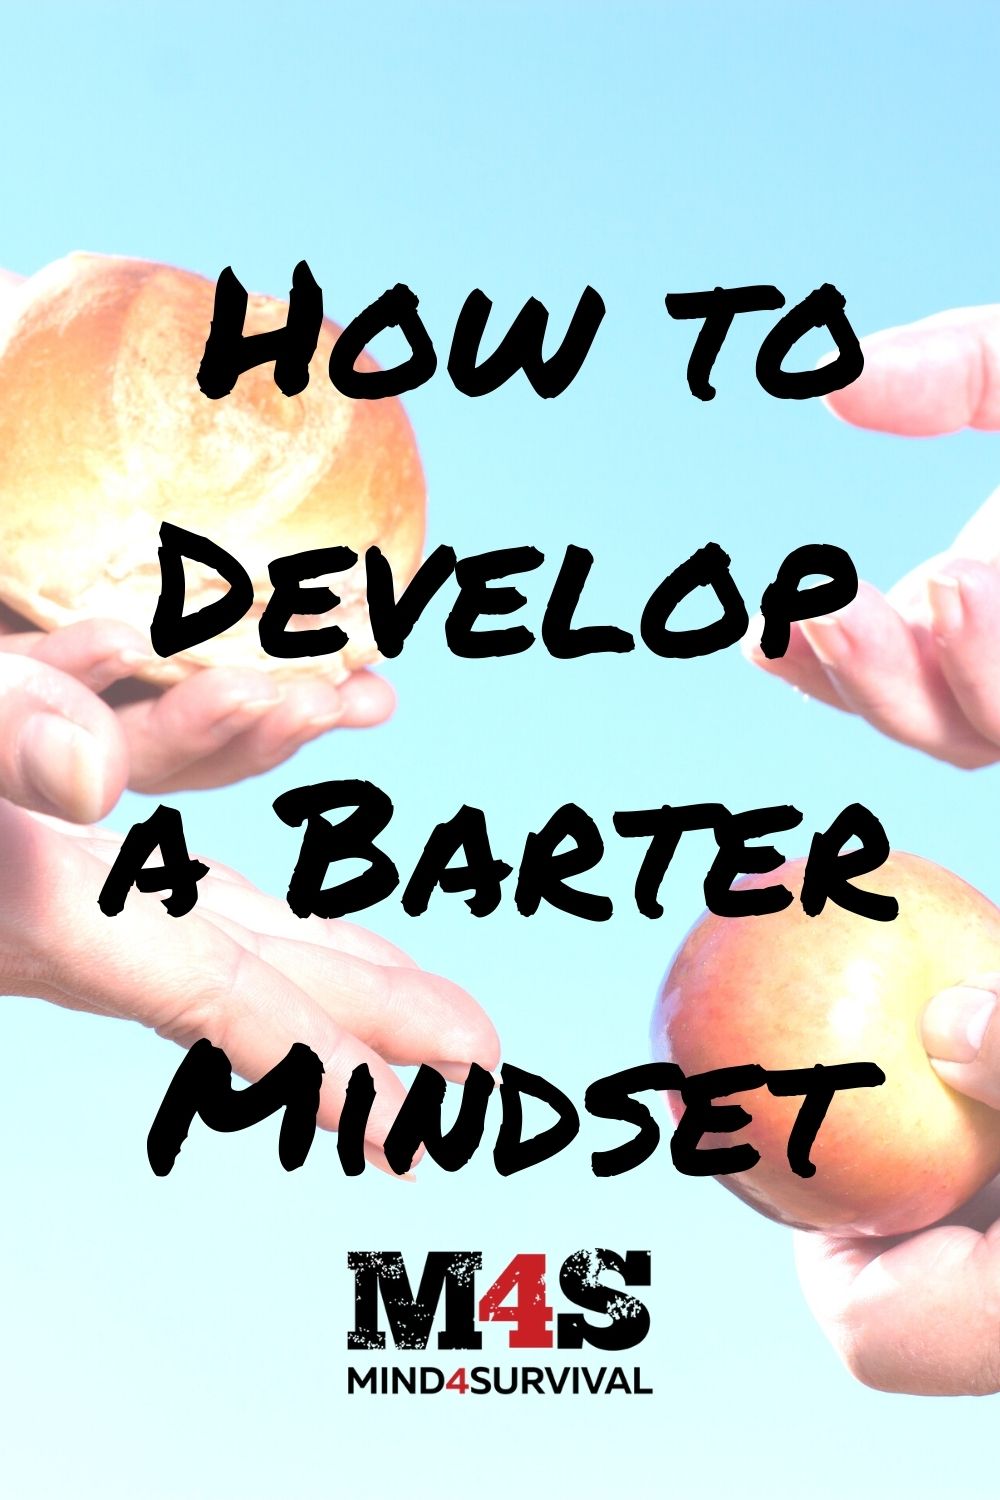 Start Developing a Barter Mindset Right Now